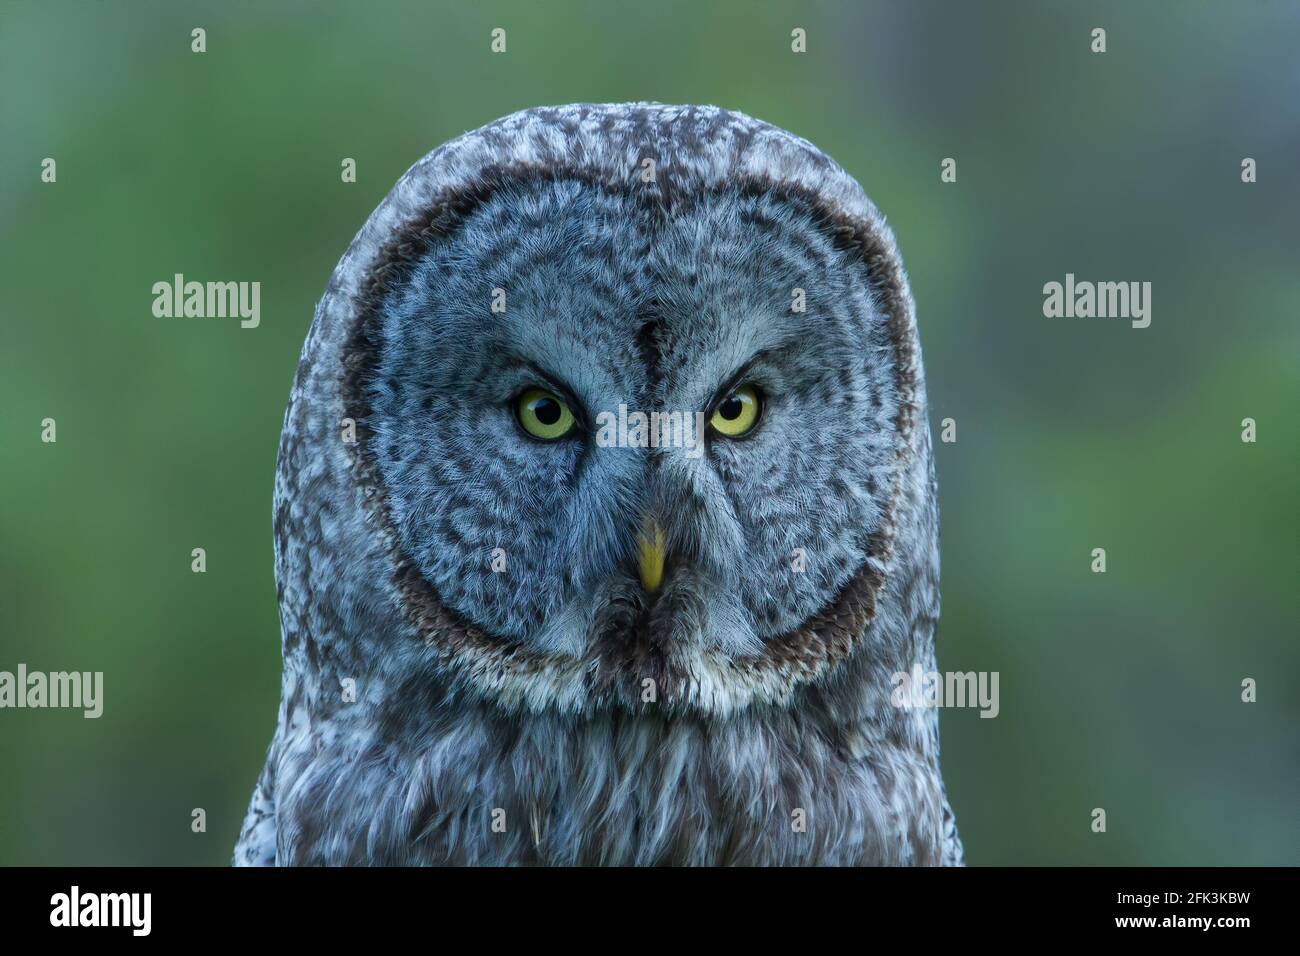 Great Gray Owl (Strix nebulosa) perched in the forest and close-up Stock Photo